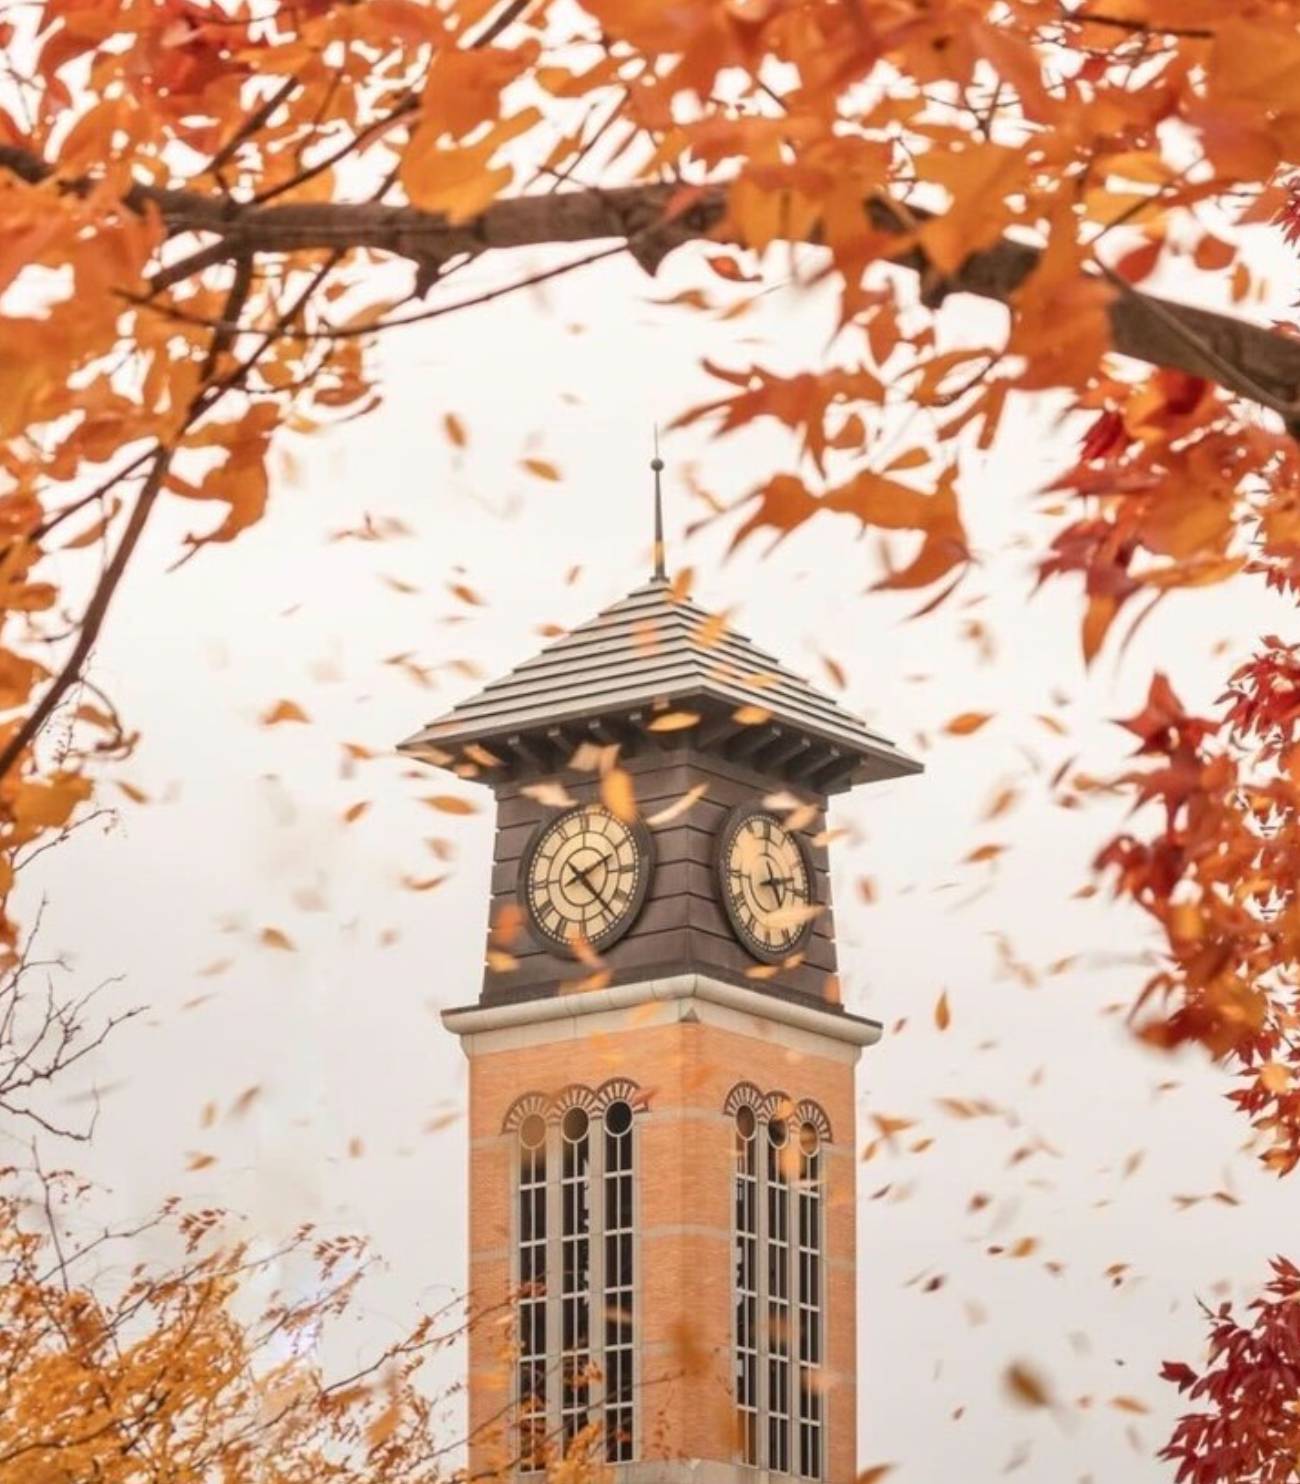 A photo of the GVSU downtown clocktower with fall leaves blowing around it. This photo was the winner of the 2022 #GVFall photo challenge.